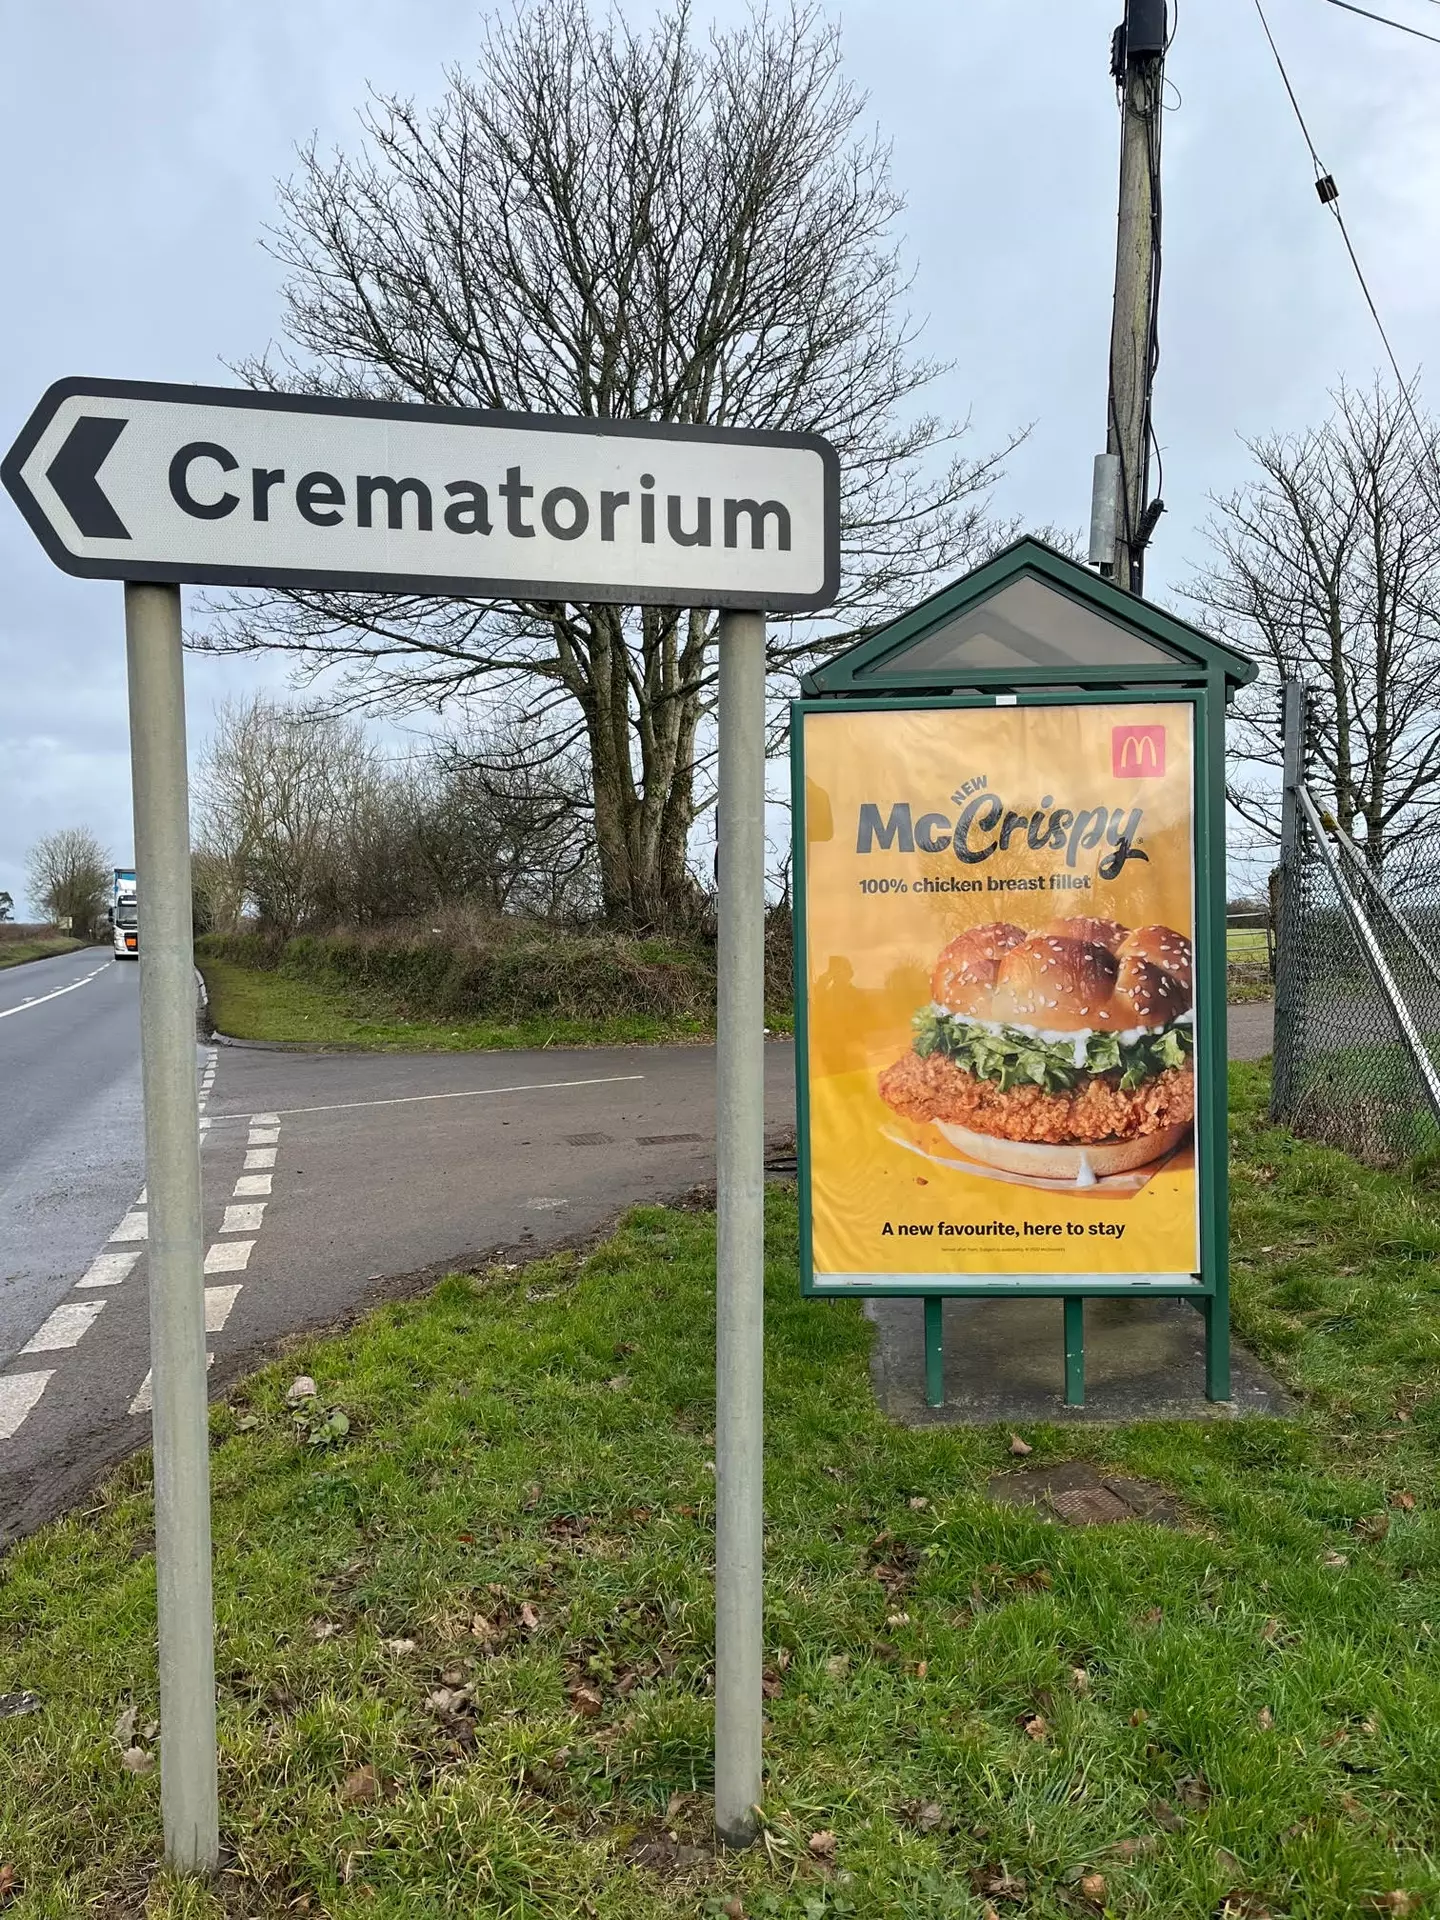 It's hard not to make the connection between the sign and the crematorium.